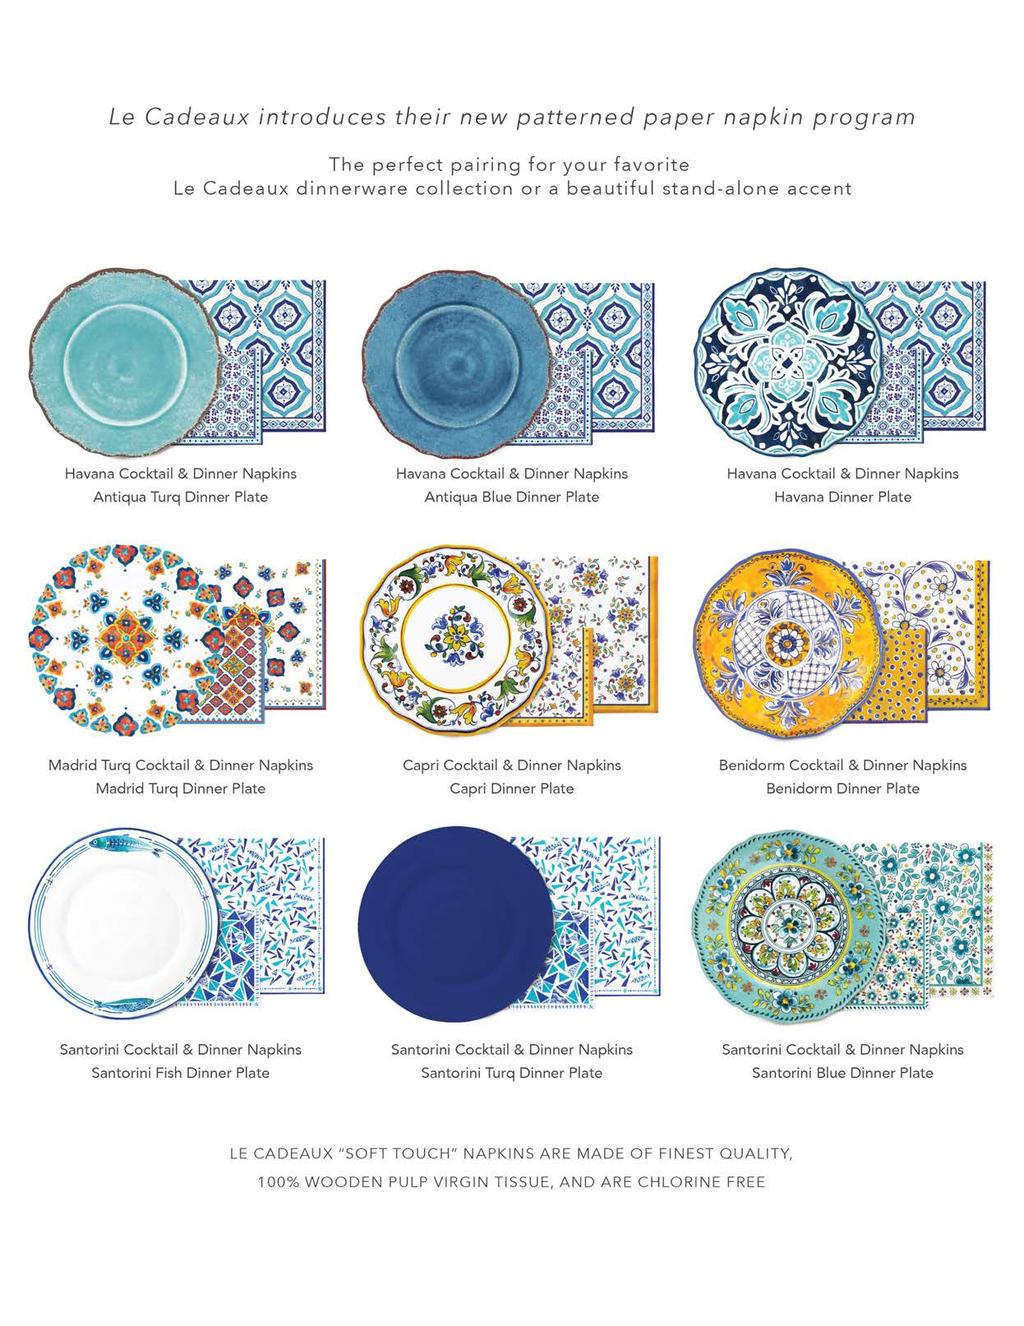 LE CADEAUX INTRODUCES THEIR COORDINATING PAPER NAPKIN PROGRAM THE PERFECT PAIRING FOR YOUR FAVORITE LE CADEAUX DINNERWARE COLLECTION OR A BEAUTIFUL STAND-ALONE ACCENT Havana Cocktail & Dinner Napkins